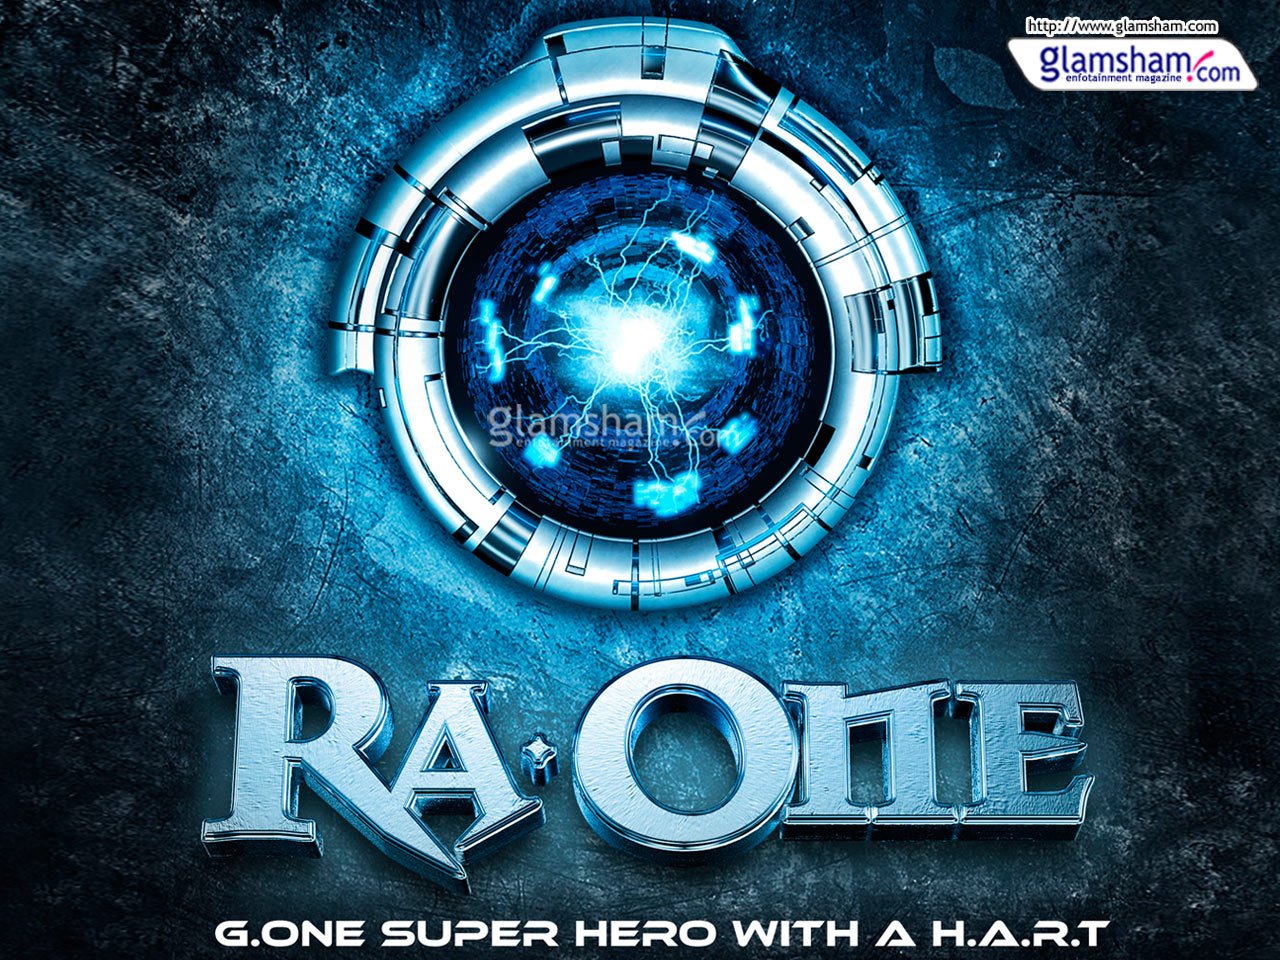 ... Mp3 Songs | Ra One Songs Download| Ra One videos | Ra One Wallpapers